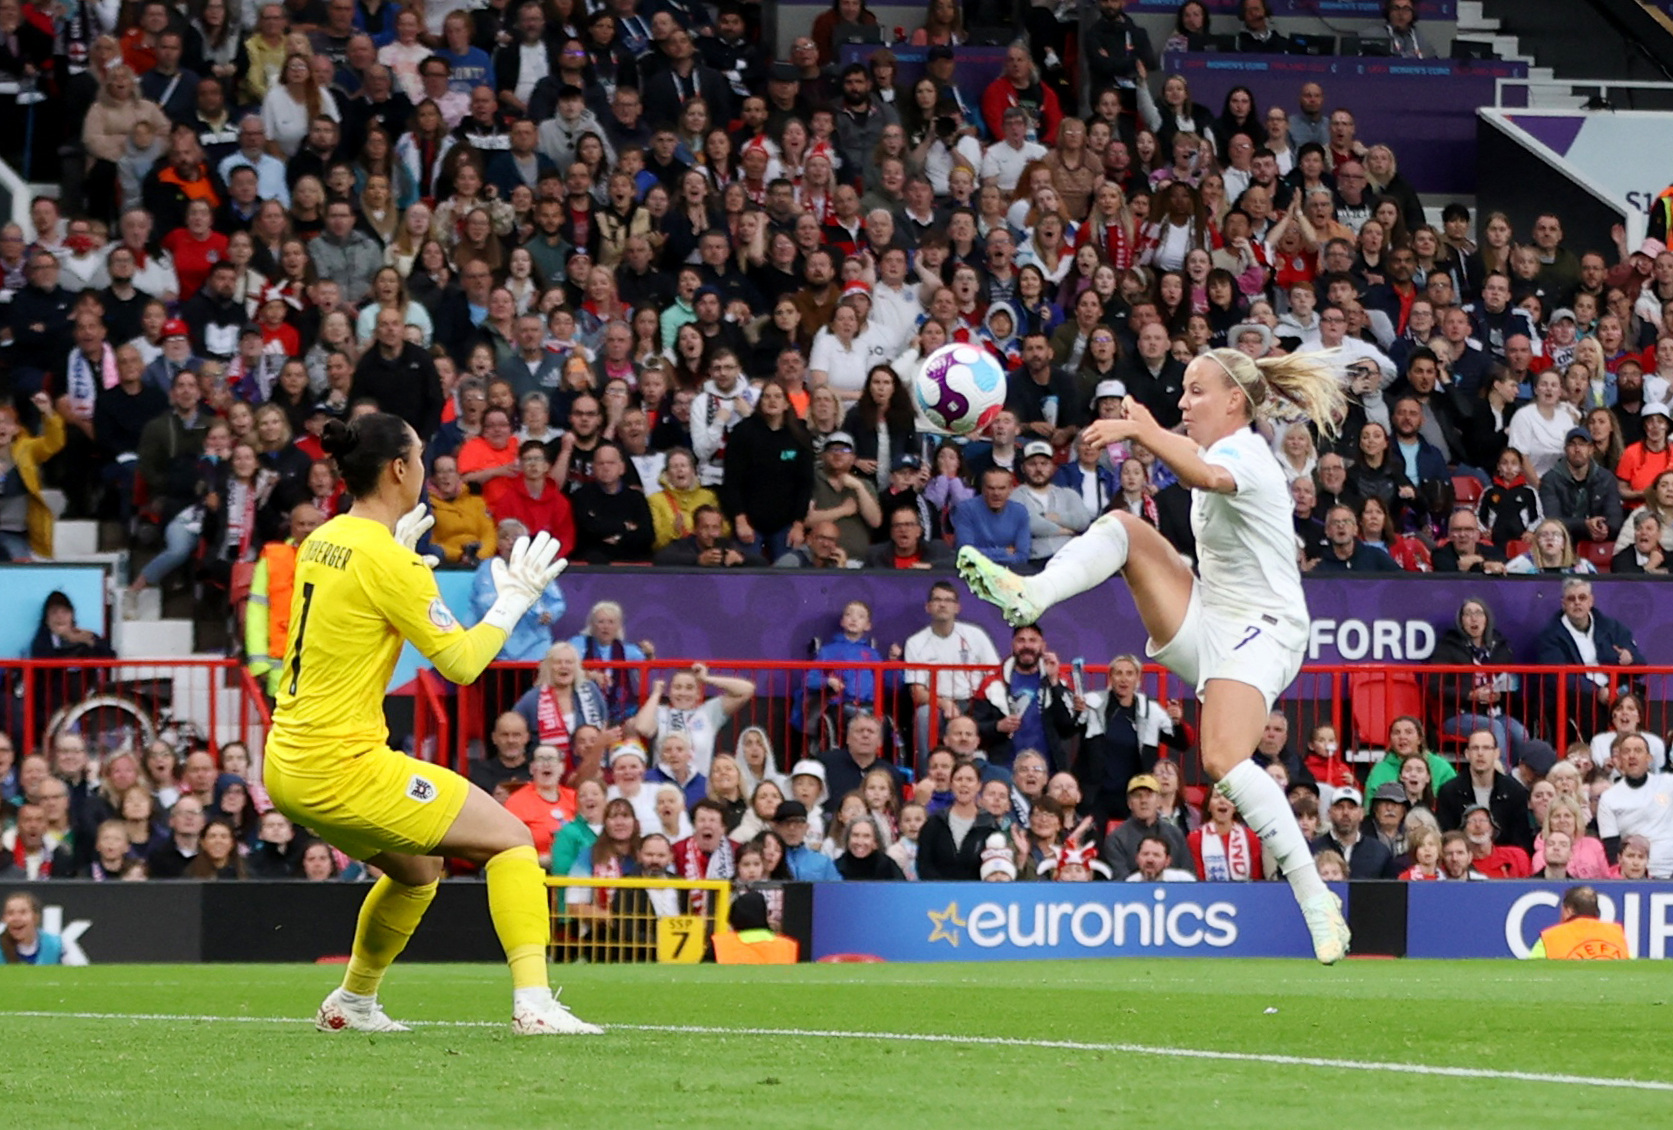 Soccer Football - Women's Euro 2022 - Group A - England v Austria - Old Trafford, Manchester, Britain - July 6, 2022  England's Beth Mead scores their first goal REUTERS/Molly Darlington